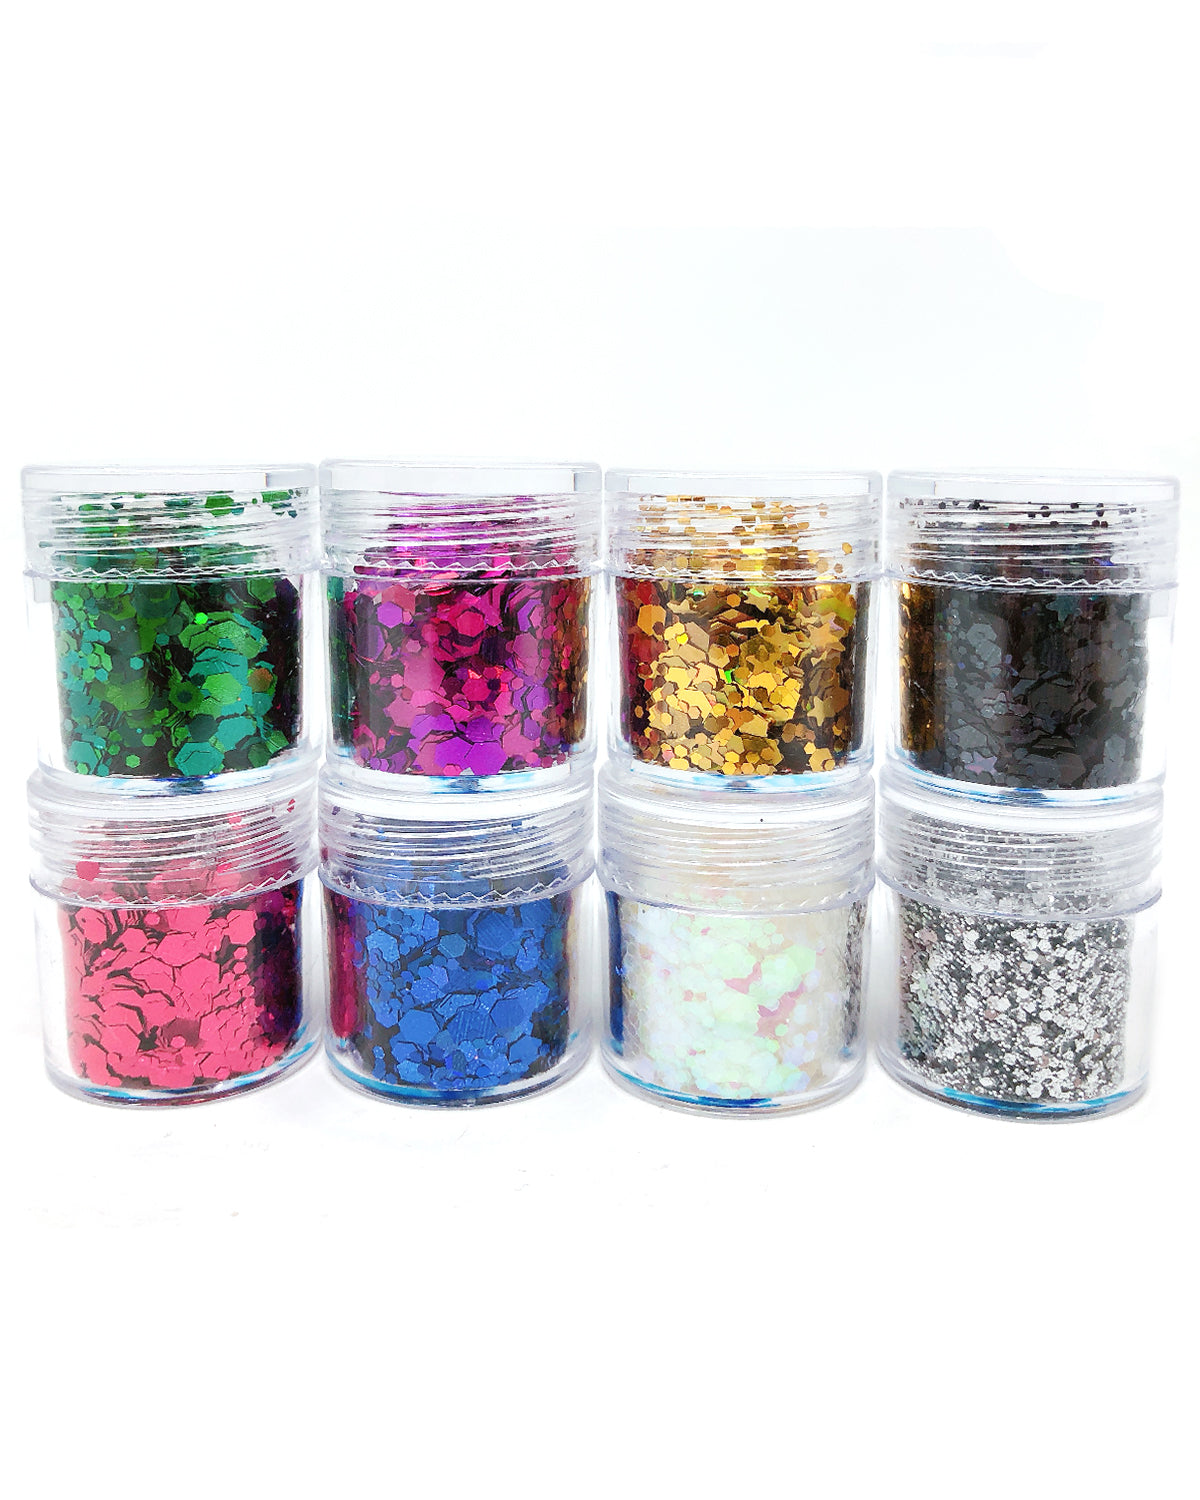 Wrapables Chunky Sparkling Glitter for Hair Face Makeup Nail Art Decoration (8 Colors), Rainbow Star Powder